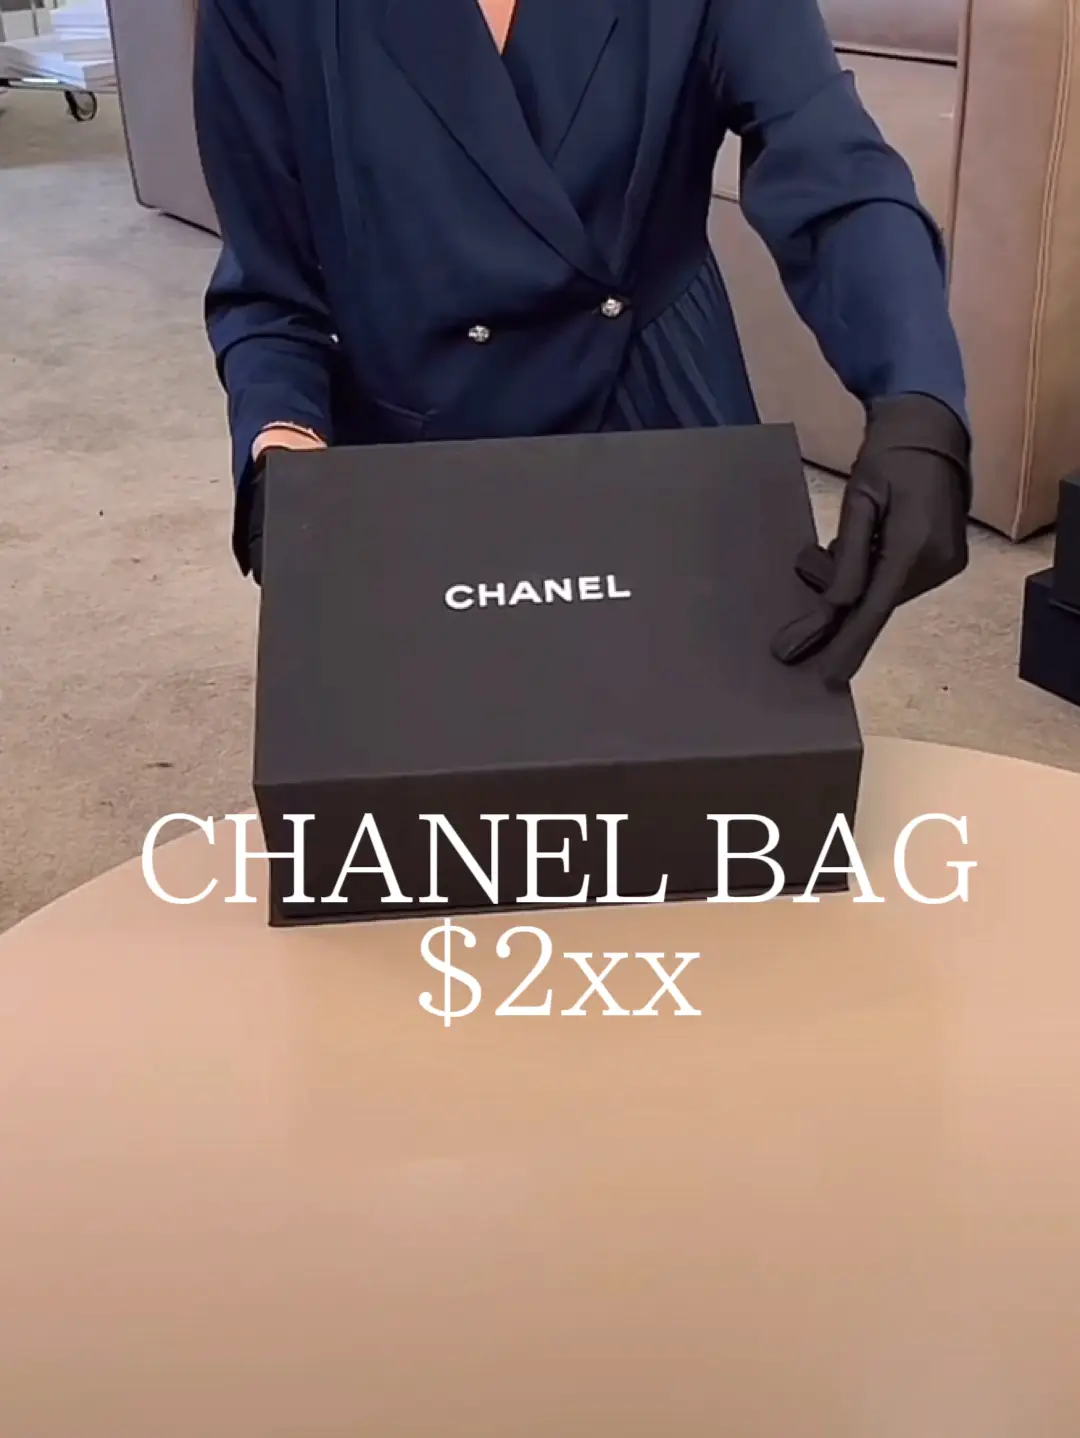 Affordable Chanel bag, Article posted by Loriabagfinds